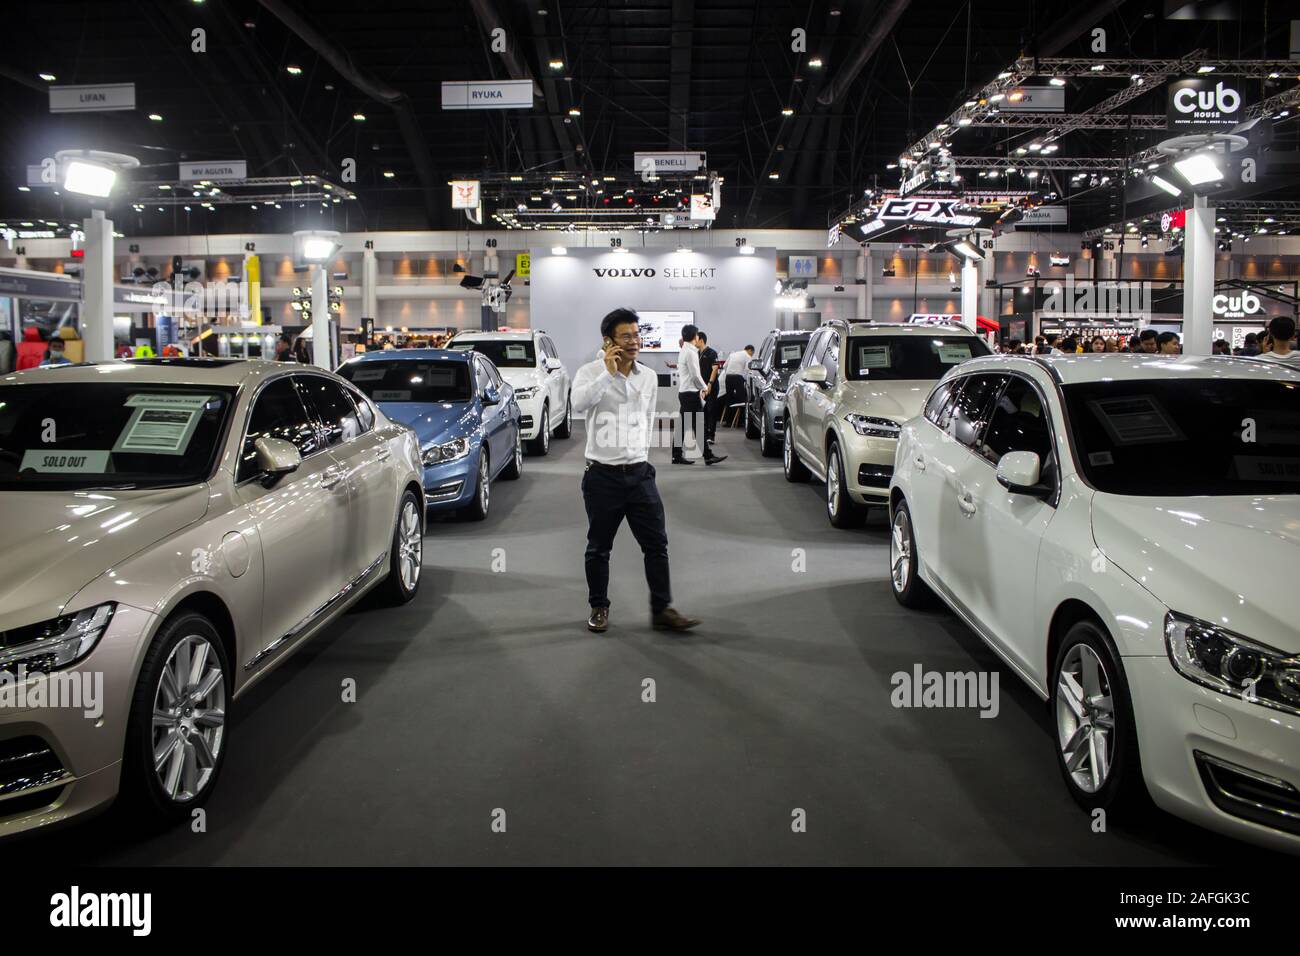 Page 2 Volvo Car Showroom High Resolution Stock Photography And Images Alamy